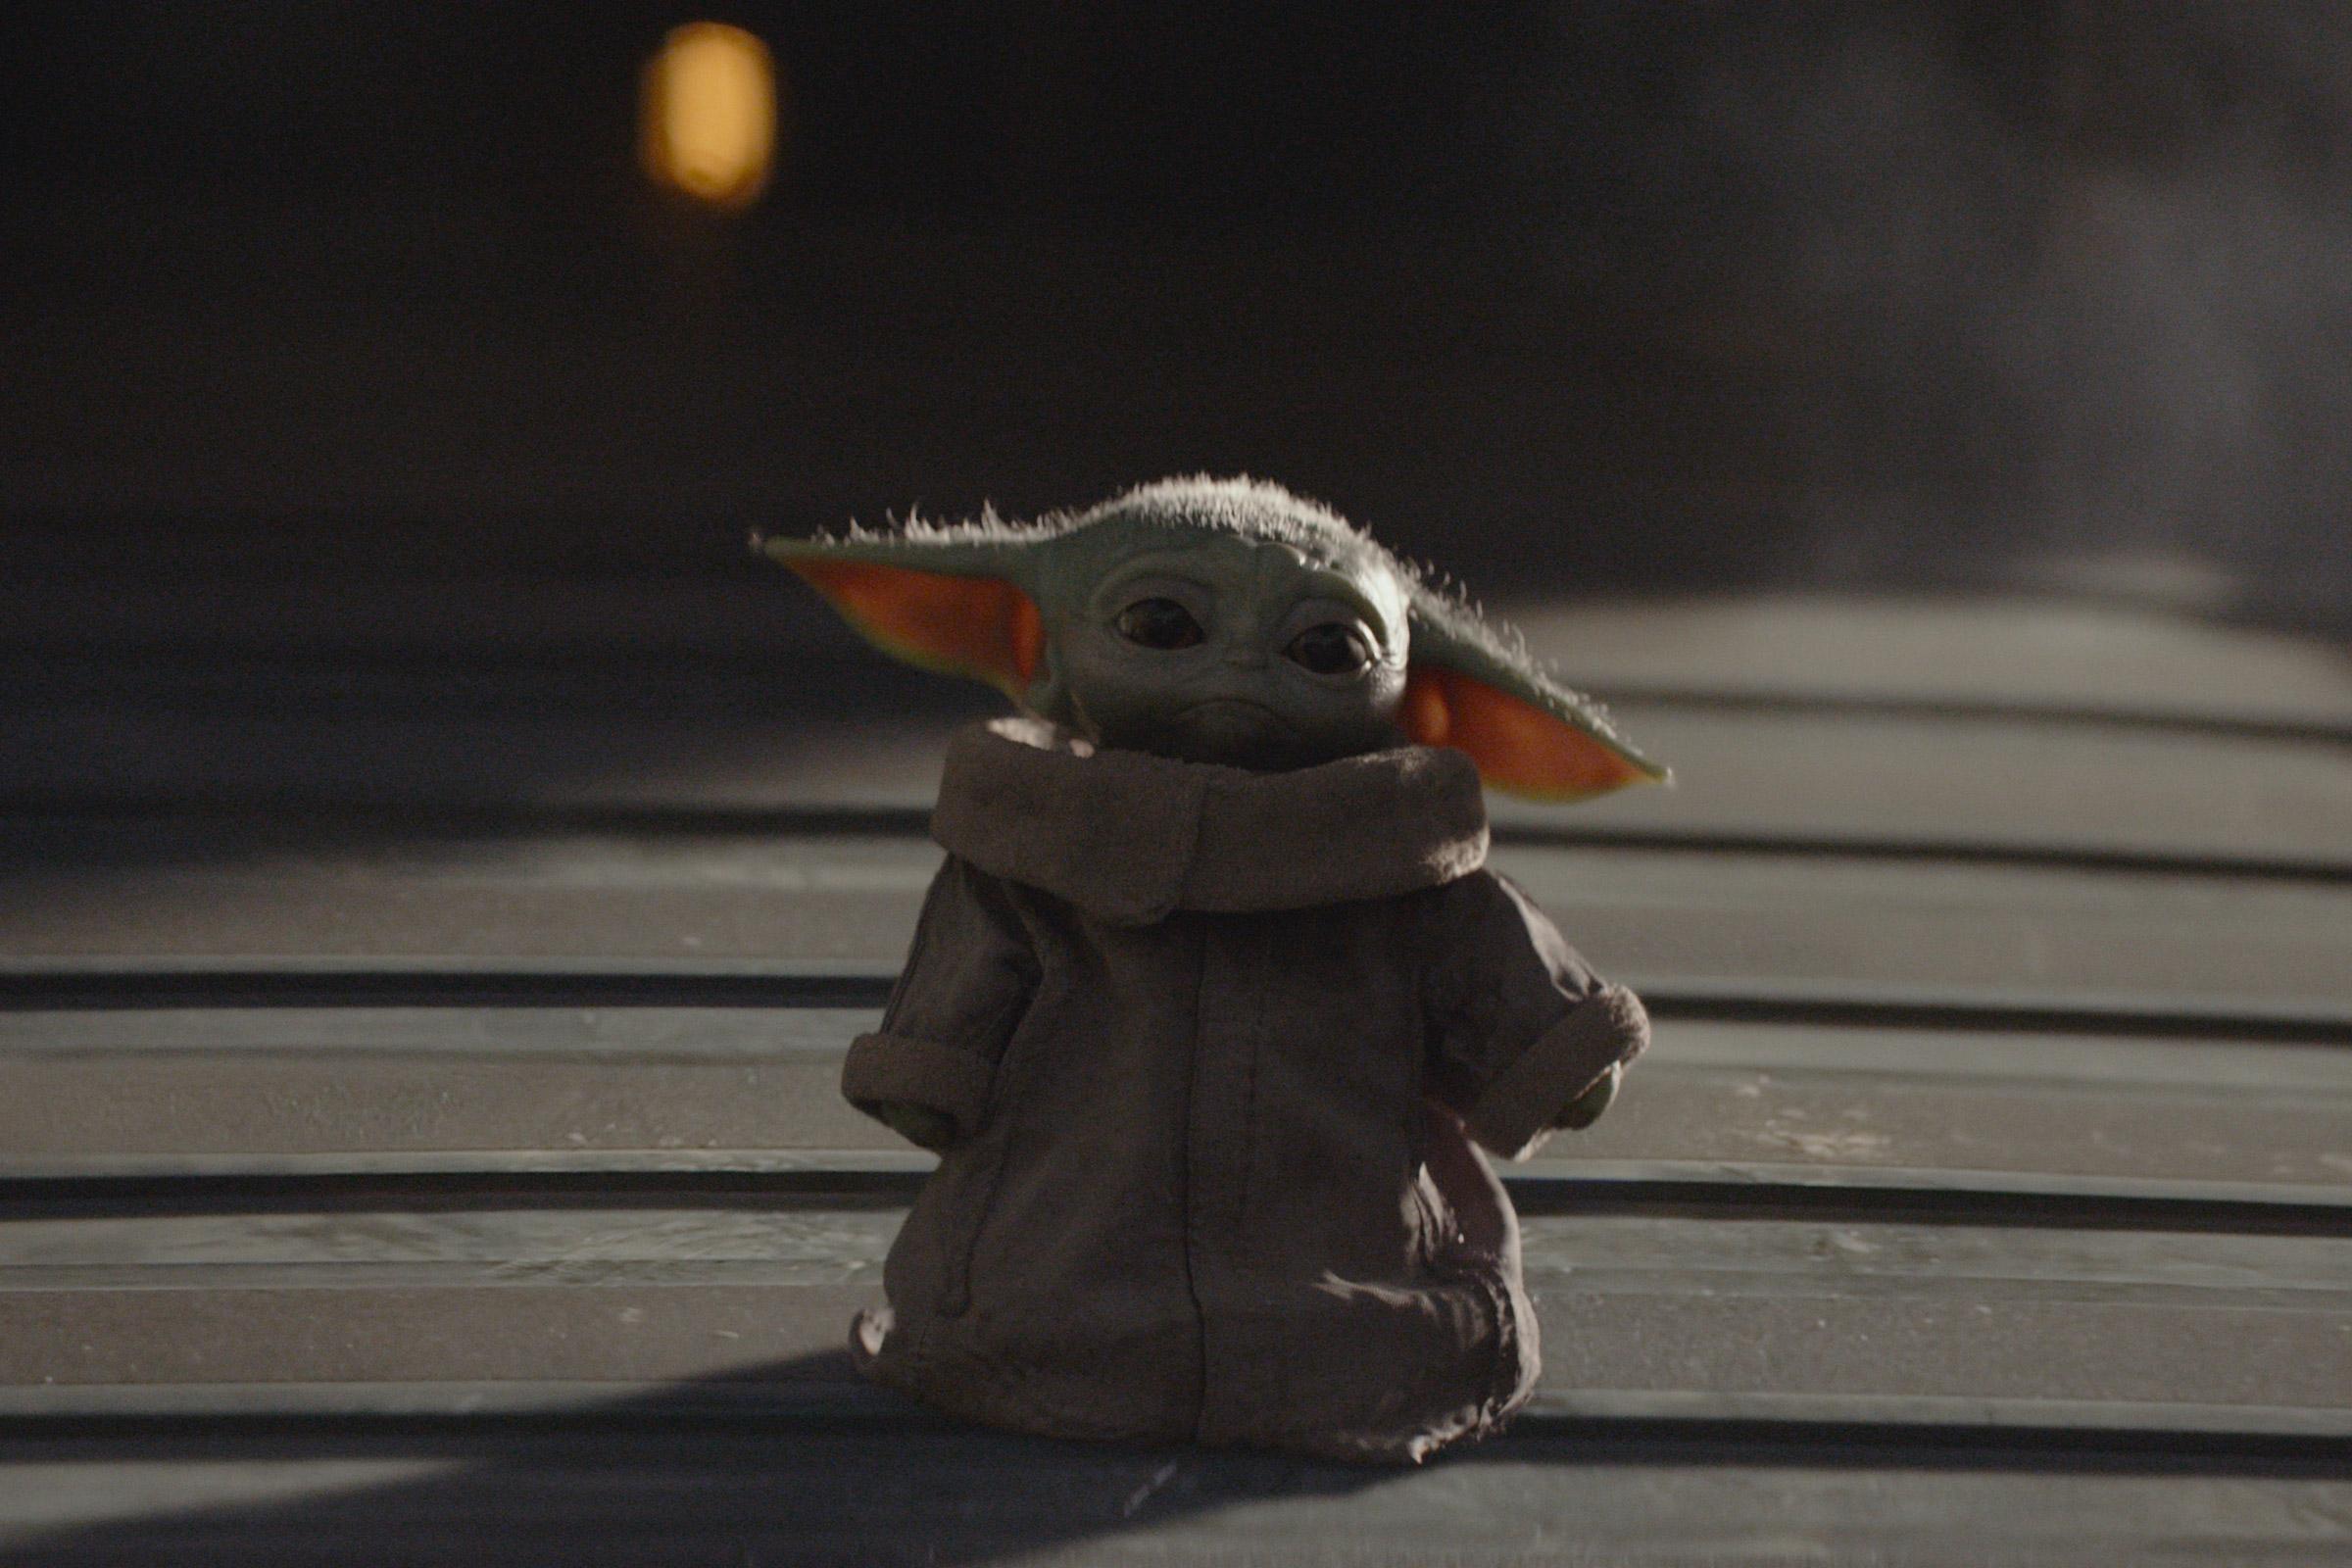 Baby Yoda Christmas Memes Are Here to Spread Good Cheer